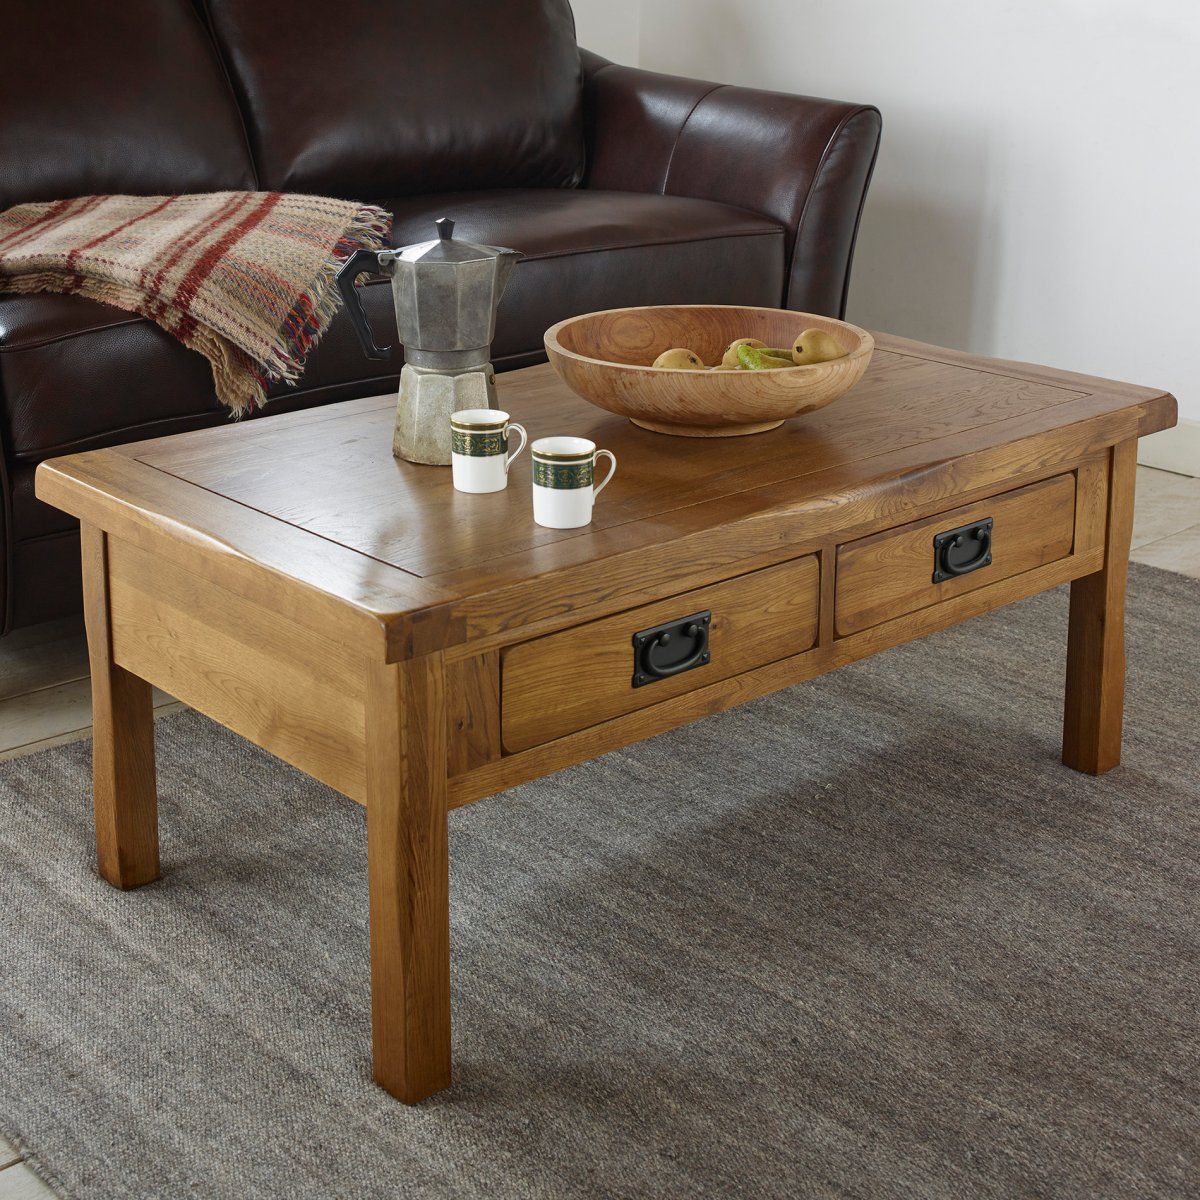 Original Rustic 4 Drawer Coffee Table In Solid Oak Pertaining To Rustic Coffee Tables (View 5 of 20)